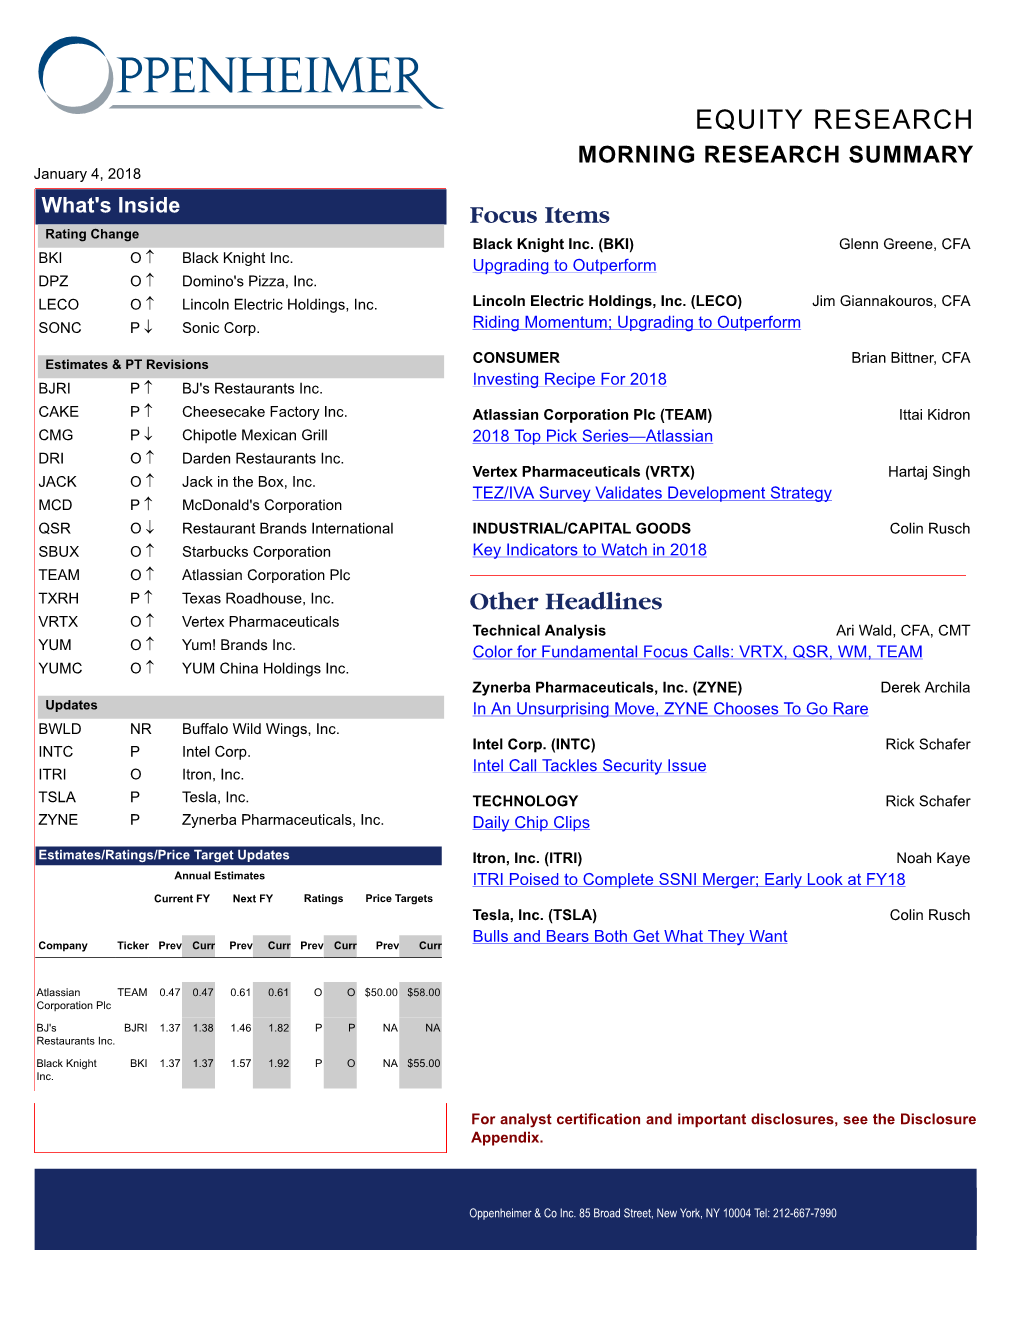 EQUITY RESEARCH MORNING RESEARCH SUMMARY January 4, 2018